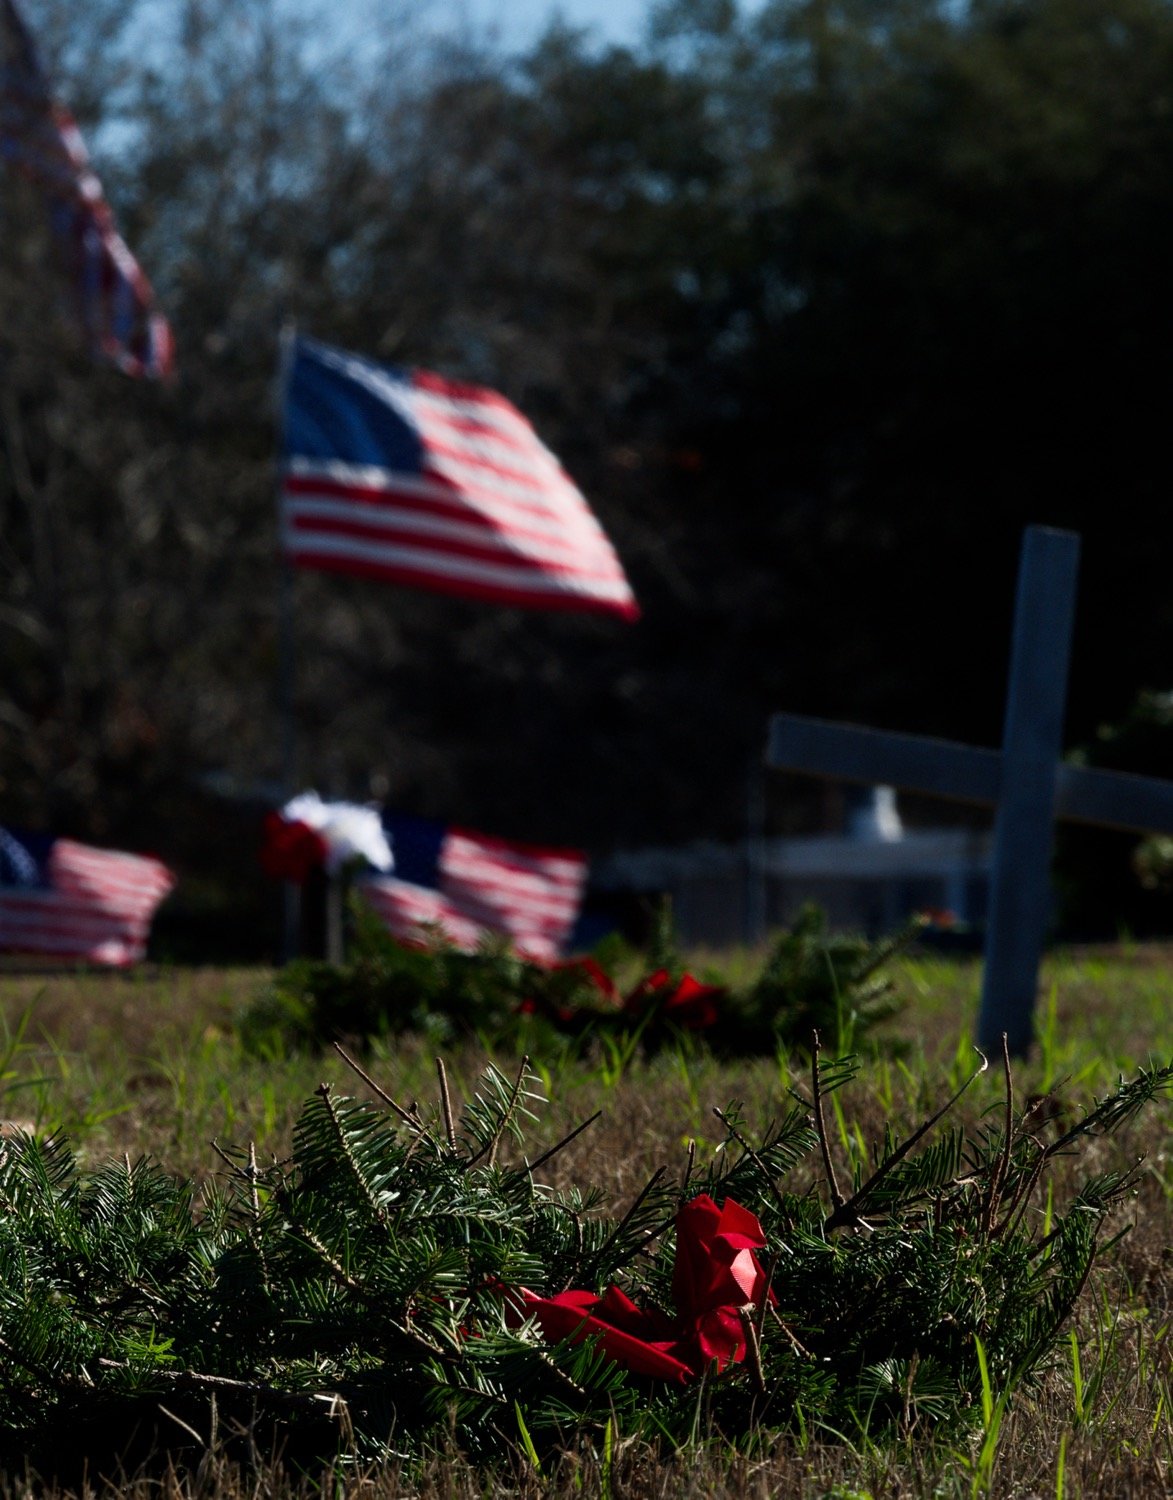 A couple of the more that 600 wreaths laid next to the markers of veterans interred at Roselawn Cemetery in Mineola. [view the holiday honoring of veterans]